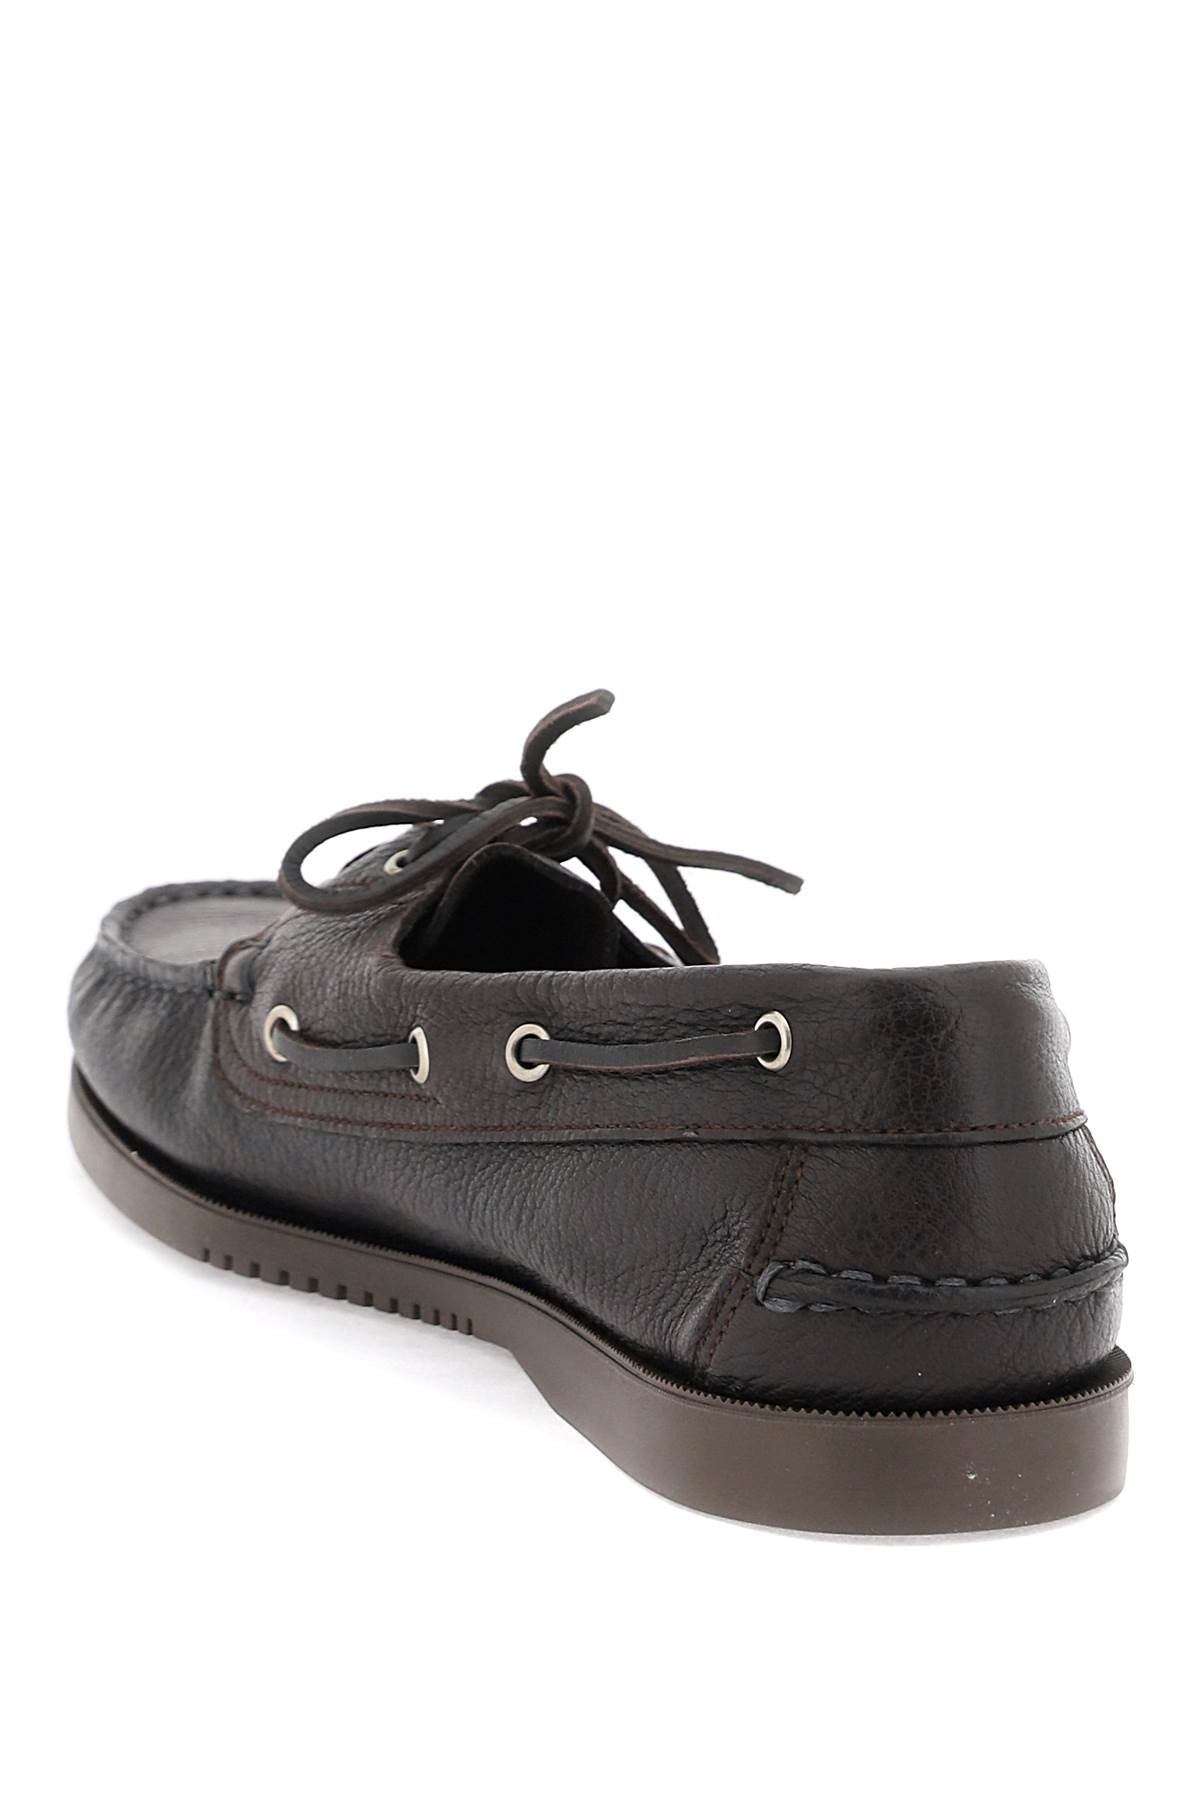 Paraboot barth loafers-2